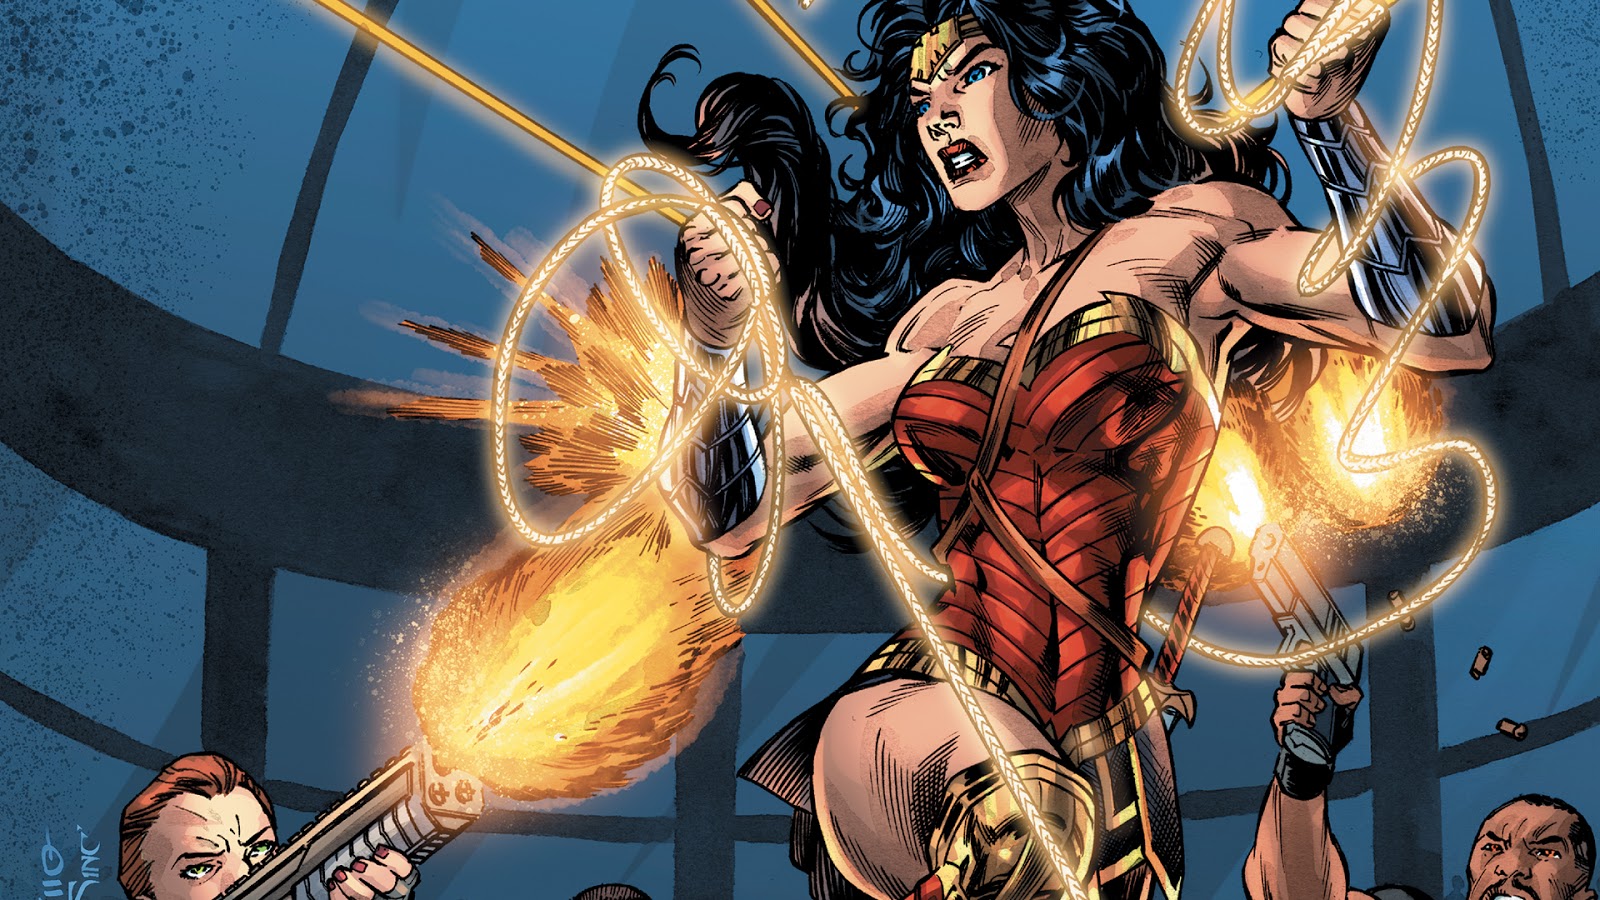 Weird Science DC Comics: Wonder Woman #30 Review and *SPOILERS*